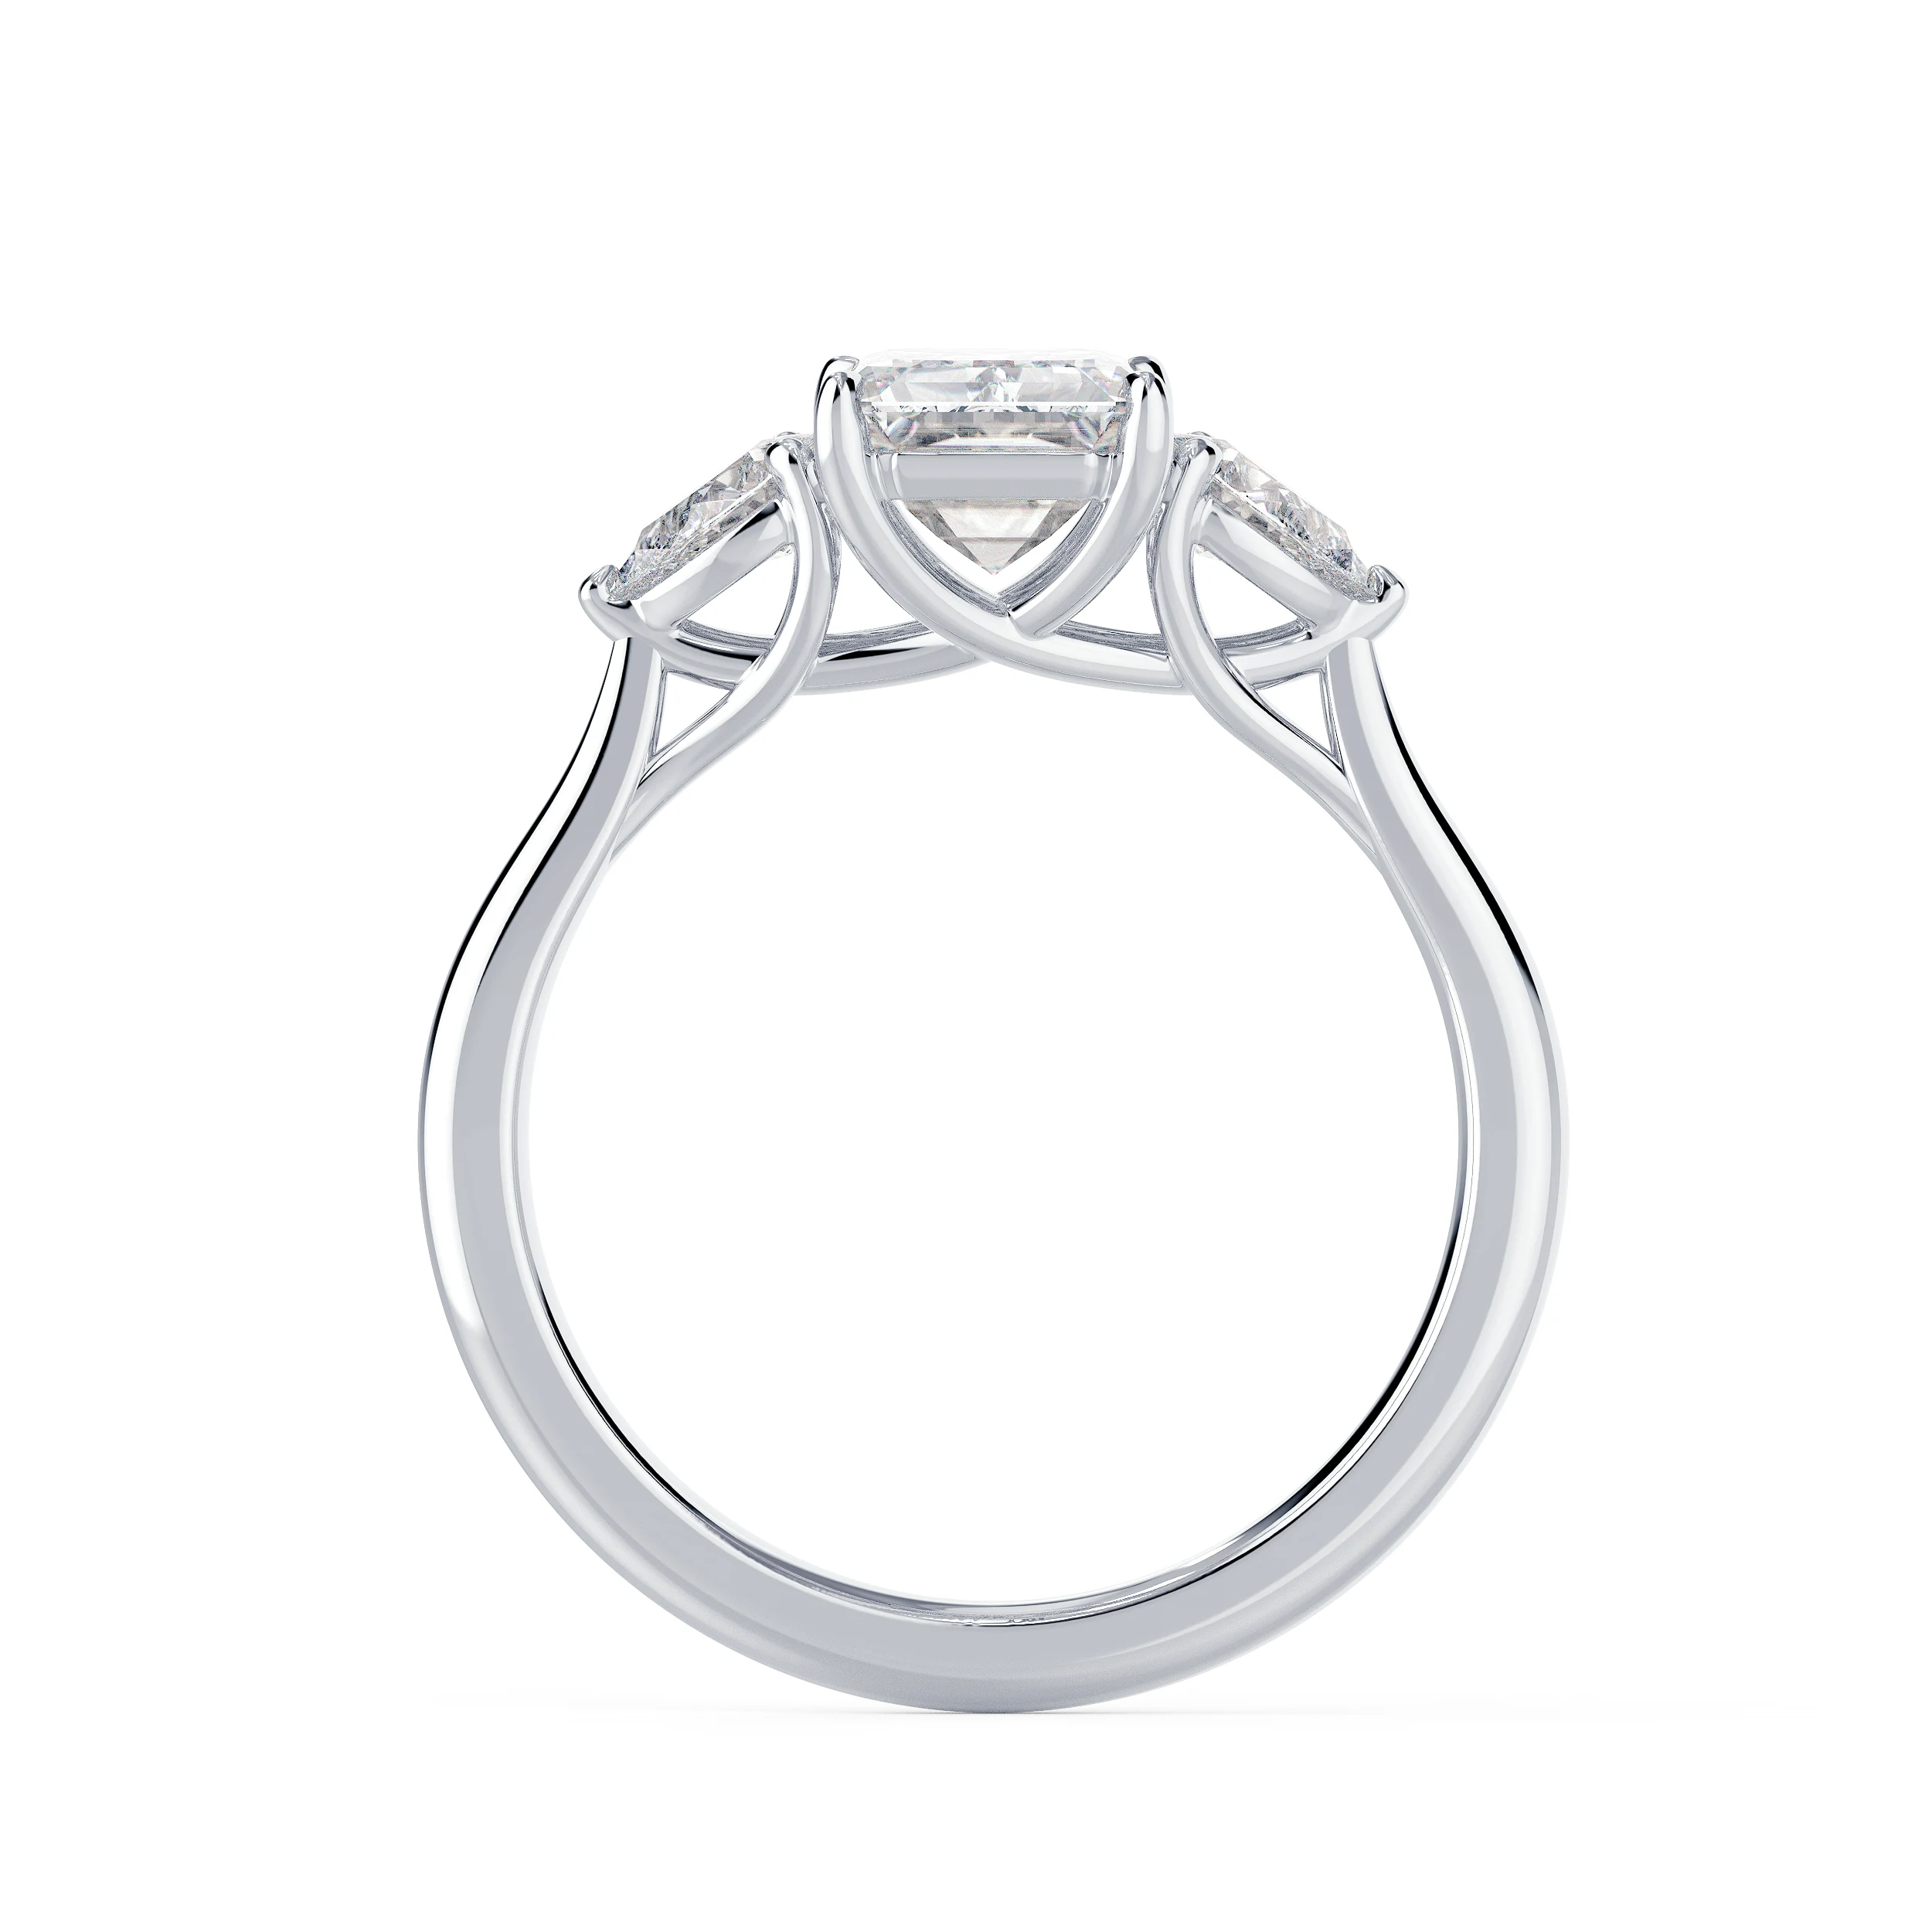 Exceptional Quality Lab Created Diamonds set in White Gold Radiant and Pear Setting (Profile View)